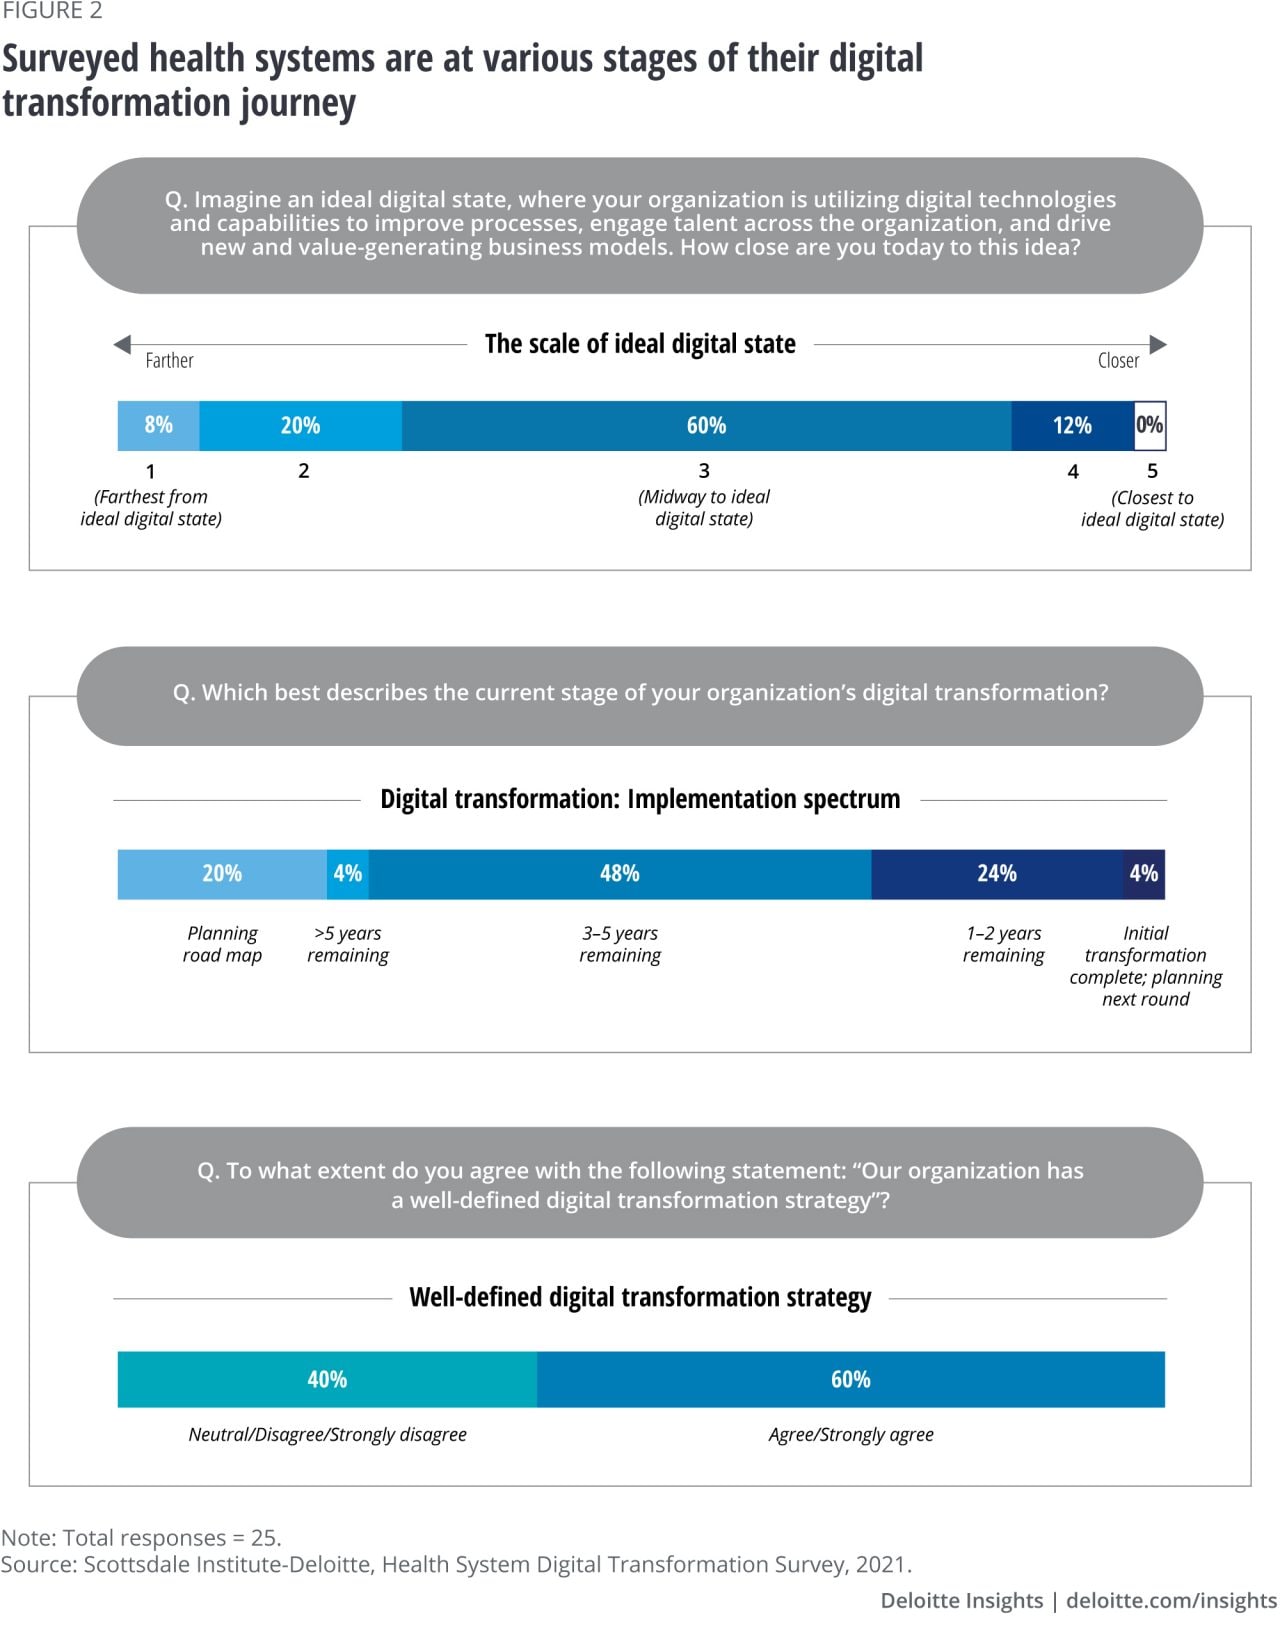 Figure 2. Surveyed health systems are at various stages of their digital transformation journey